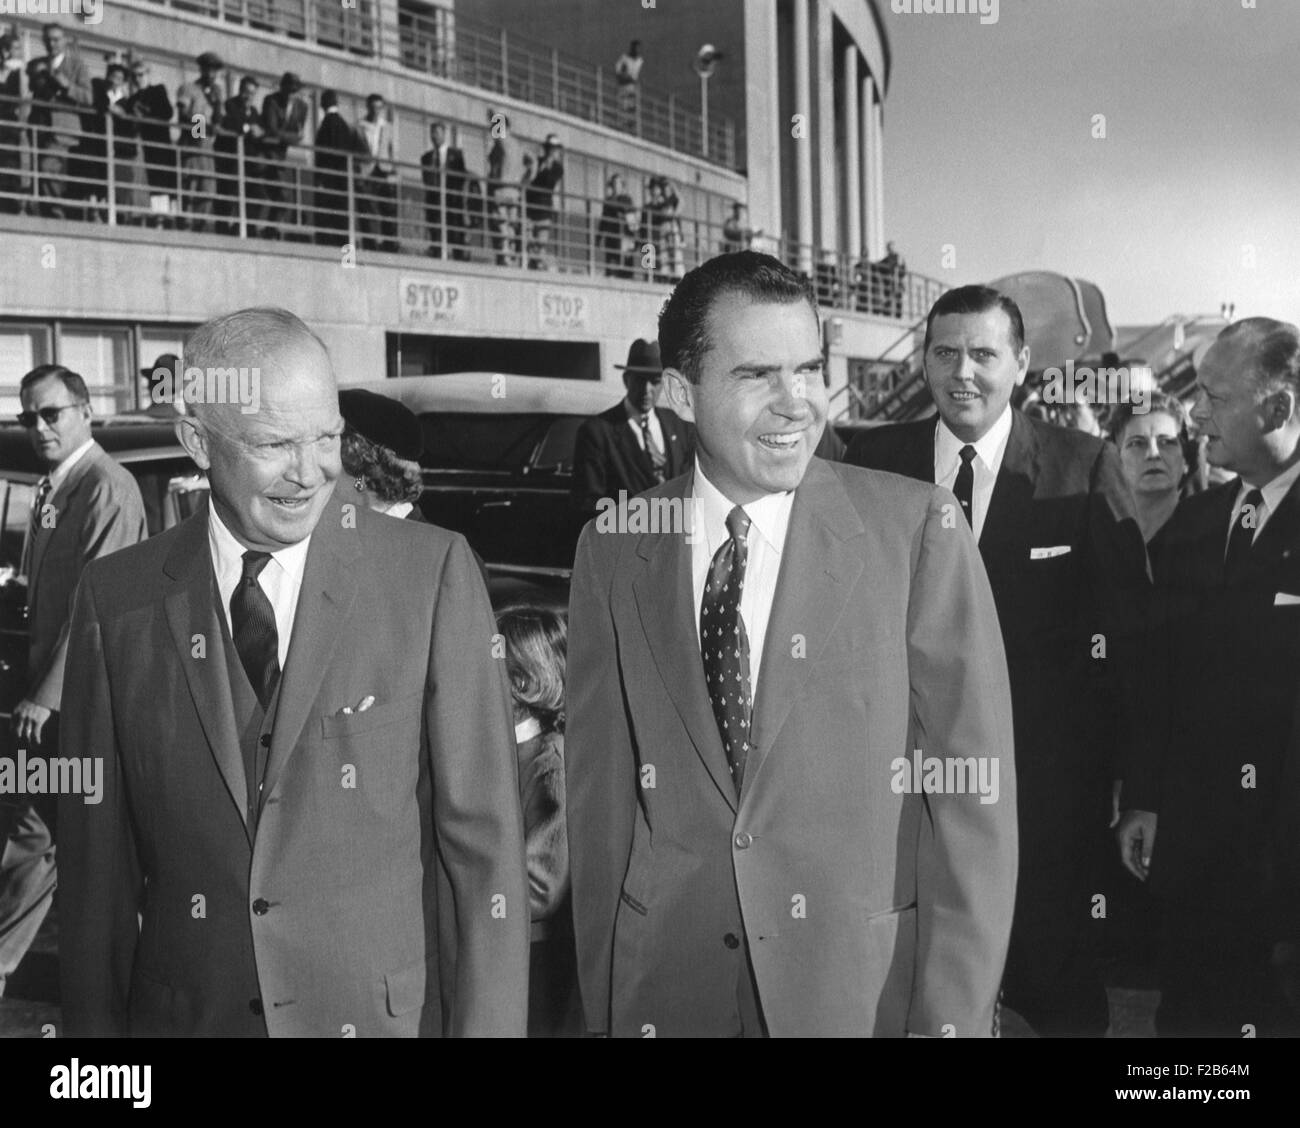 President Eisenhower seeing Richard Nixon off at National Airport. He attended a Republican Kick-off breakfast for VP Nixon, who was departing on an extensive campaign trip. Sept 18, 1956. - (BSLOC 2014 16 126) Stock Photo